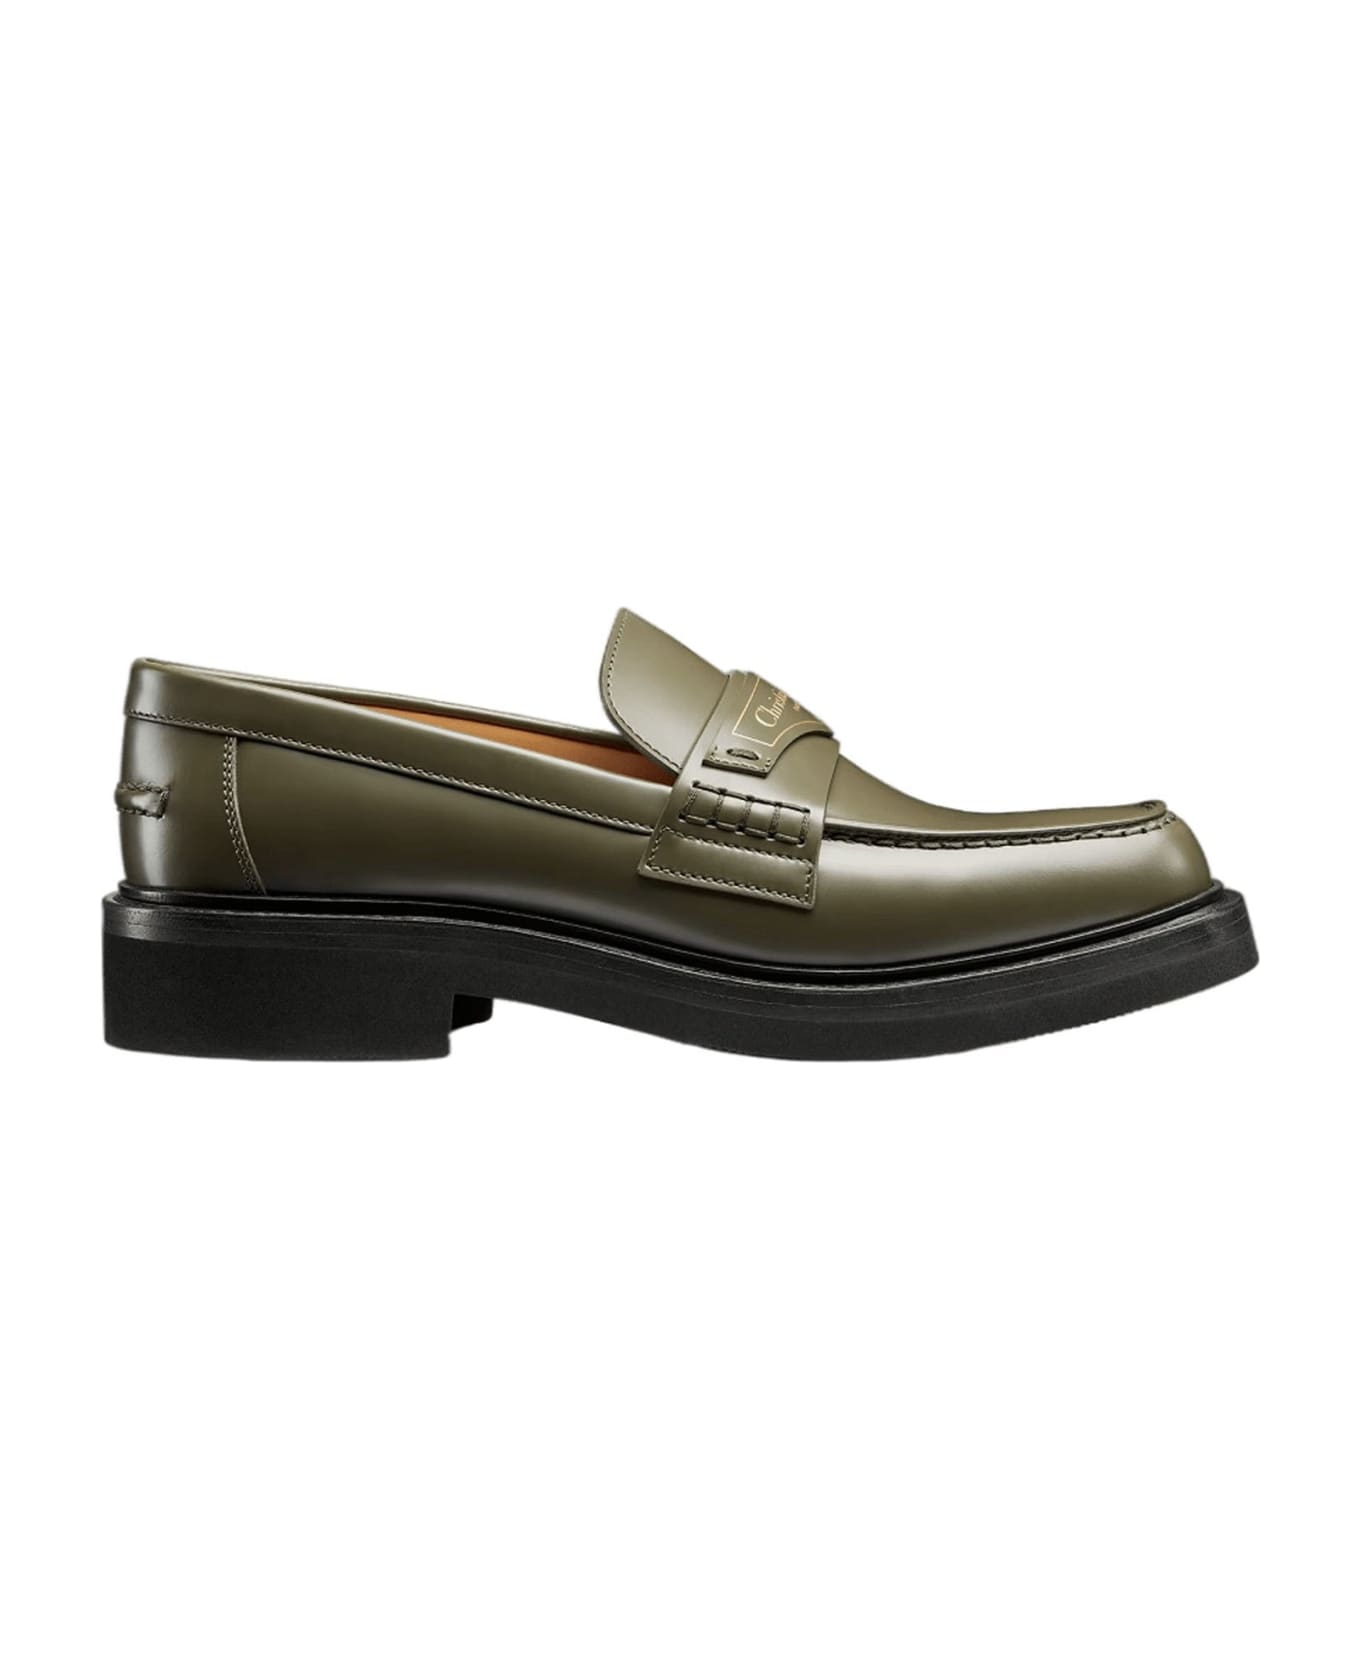 Dior Leather Loafers - Green